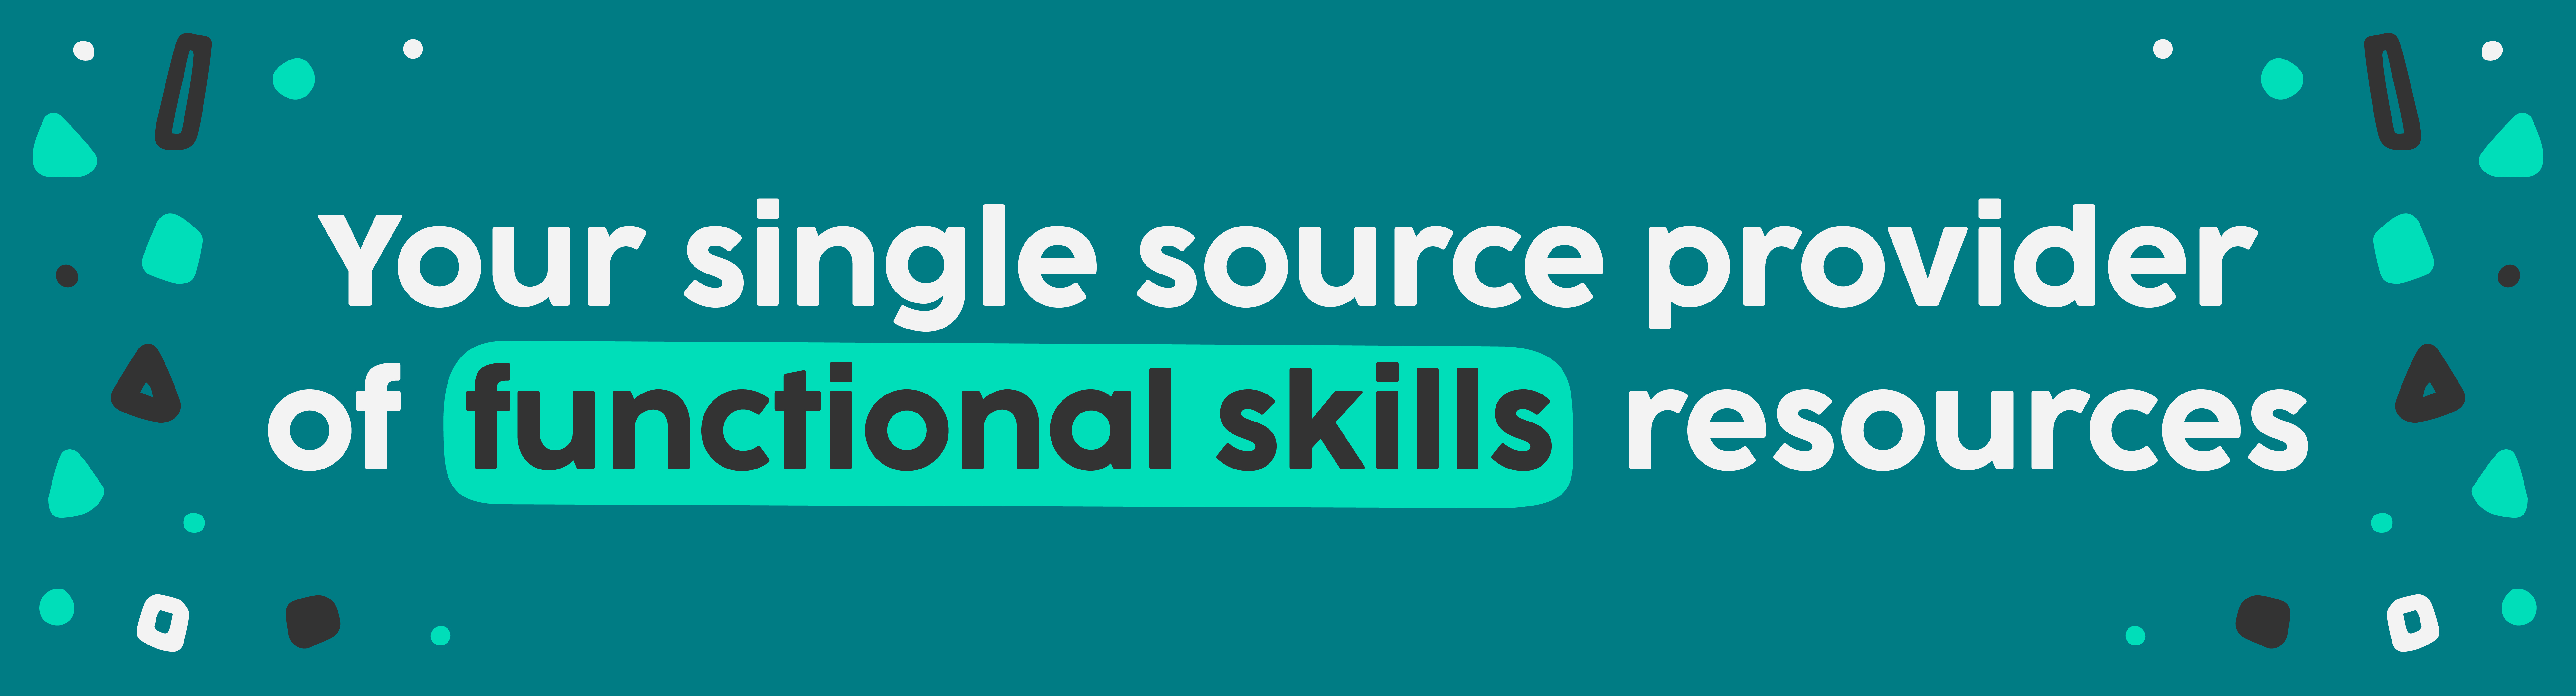 eLearning provider of functional skills resources